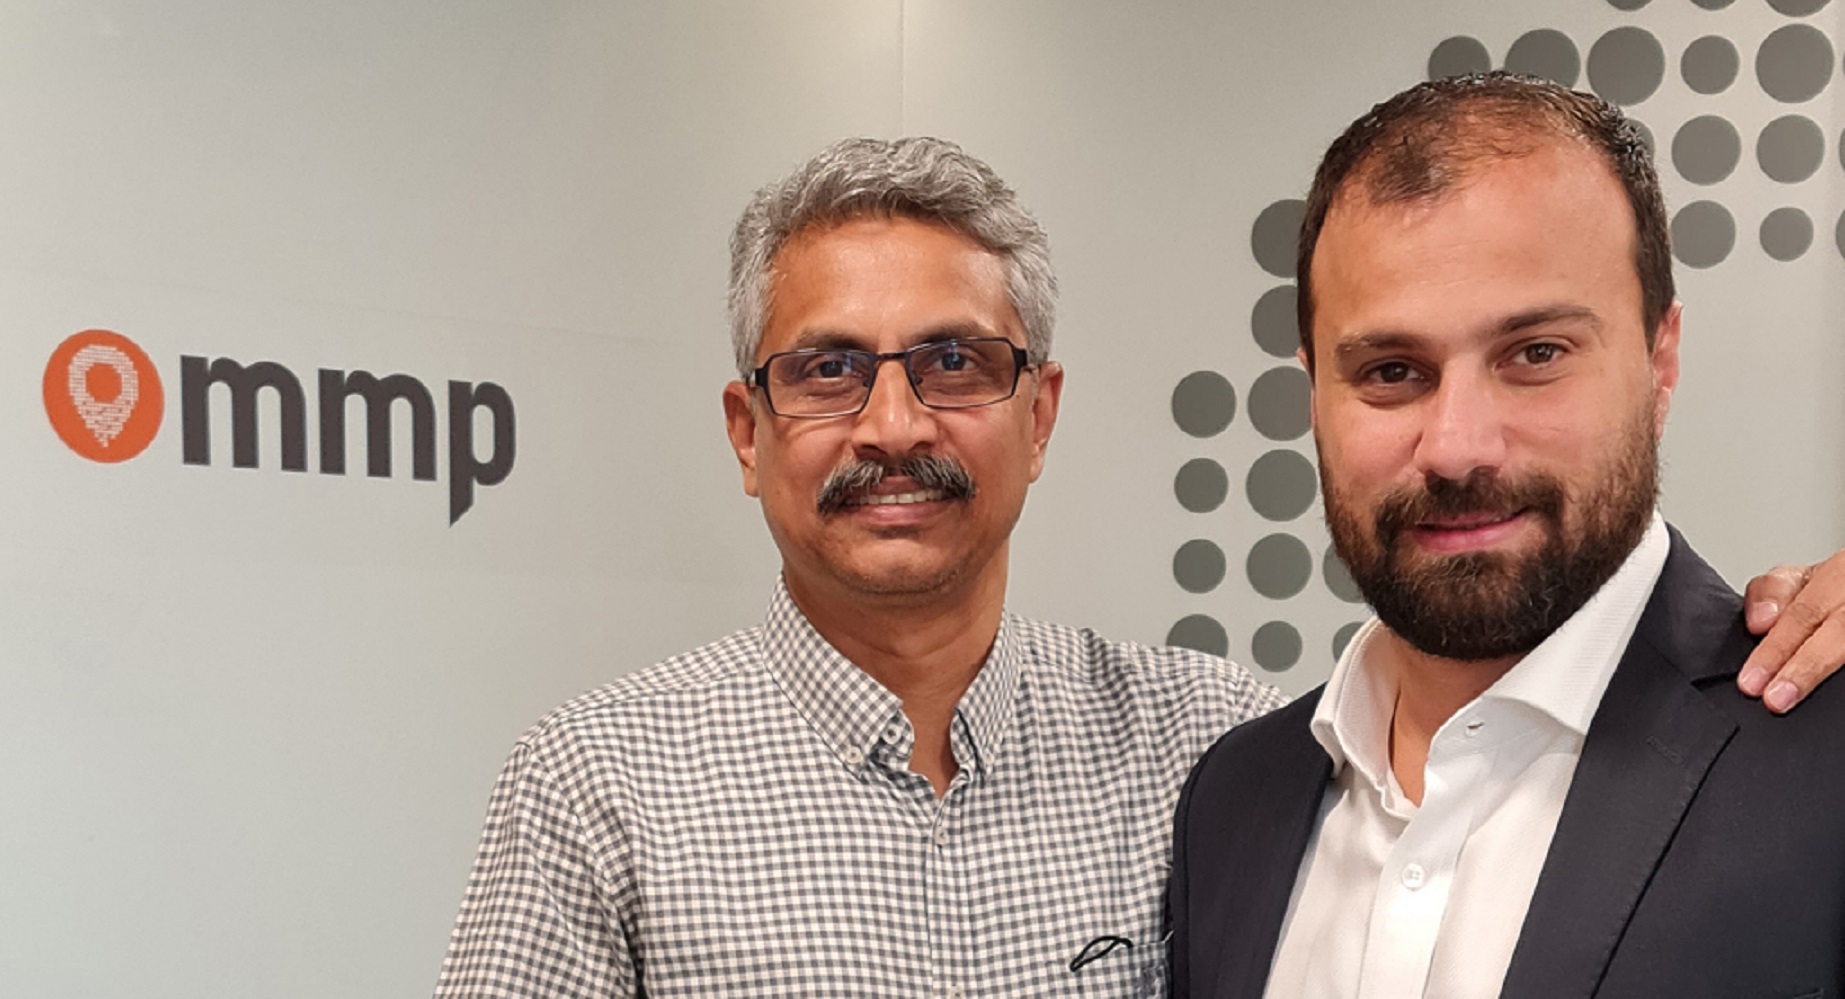 mmpww-announces-exclusive-tech-partnership-with-aqilliz-in-mena